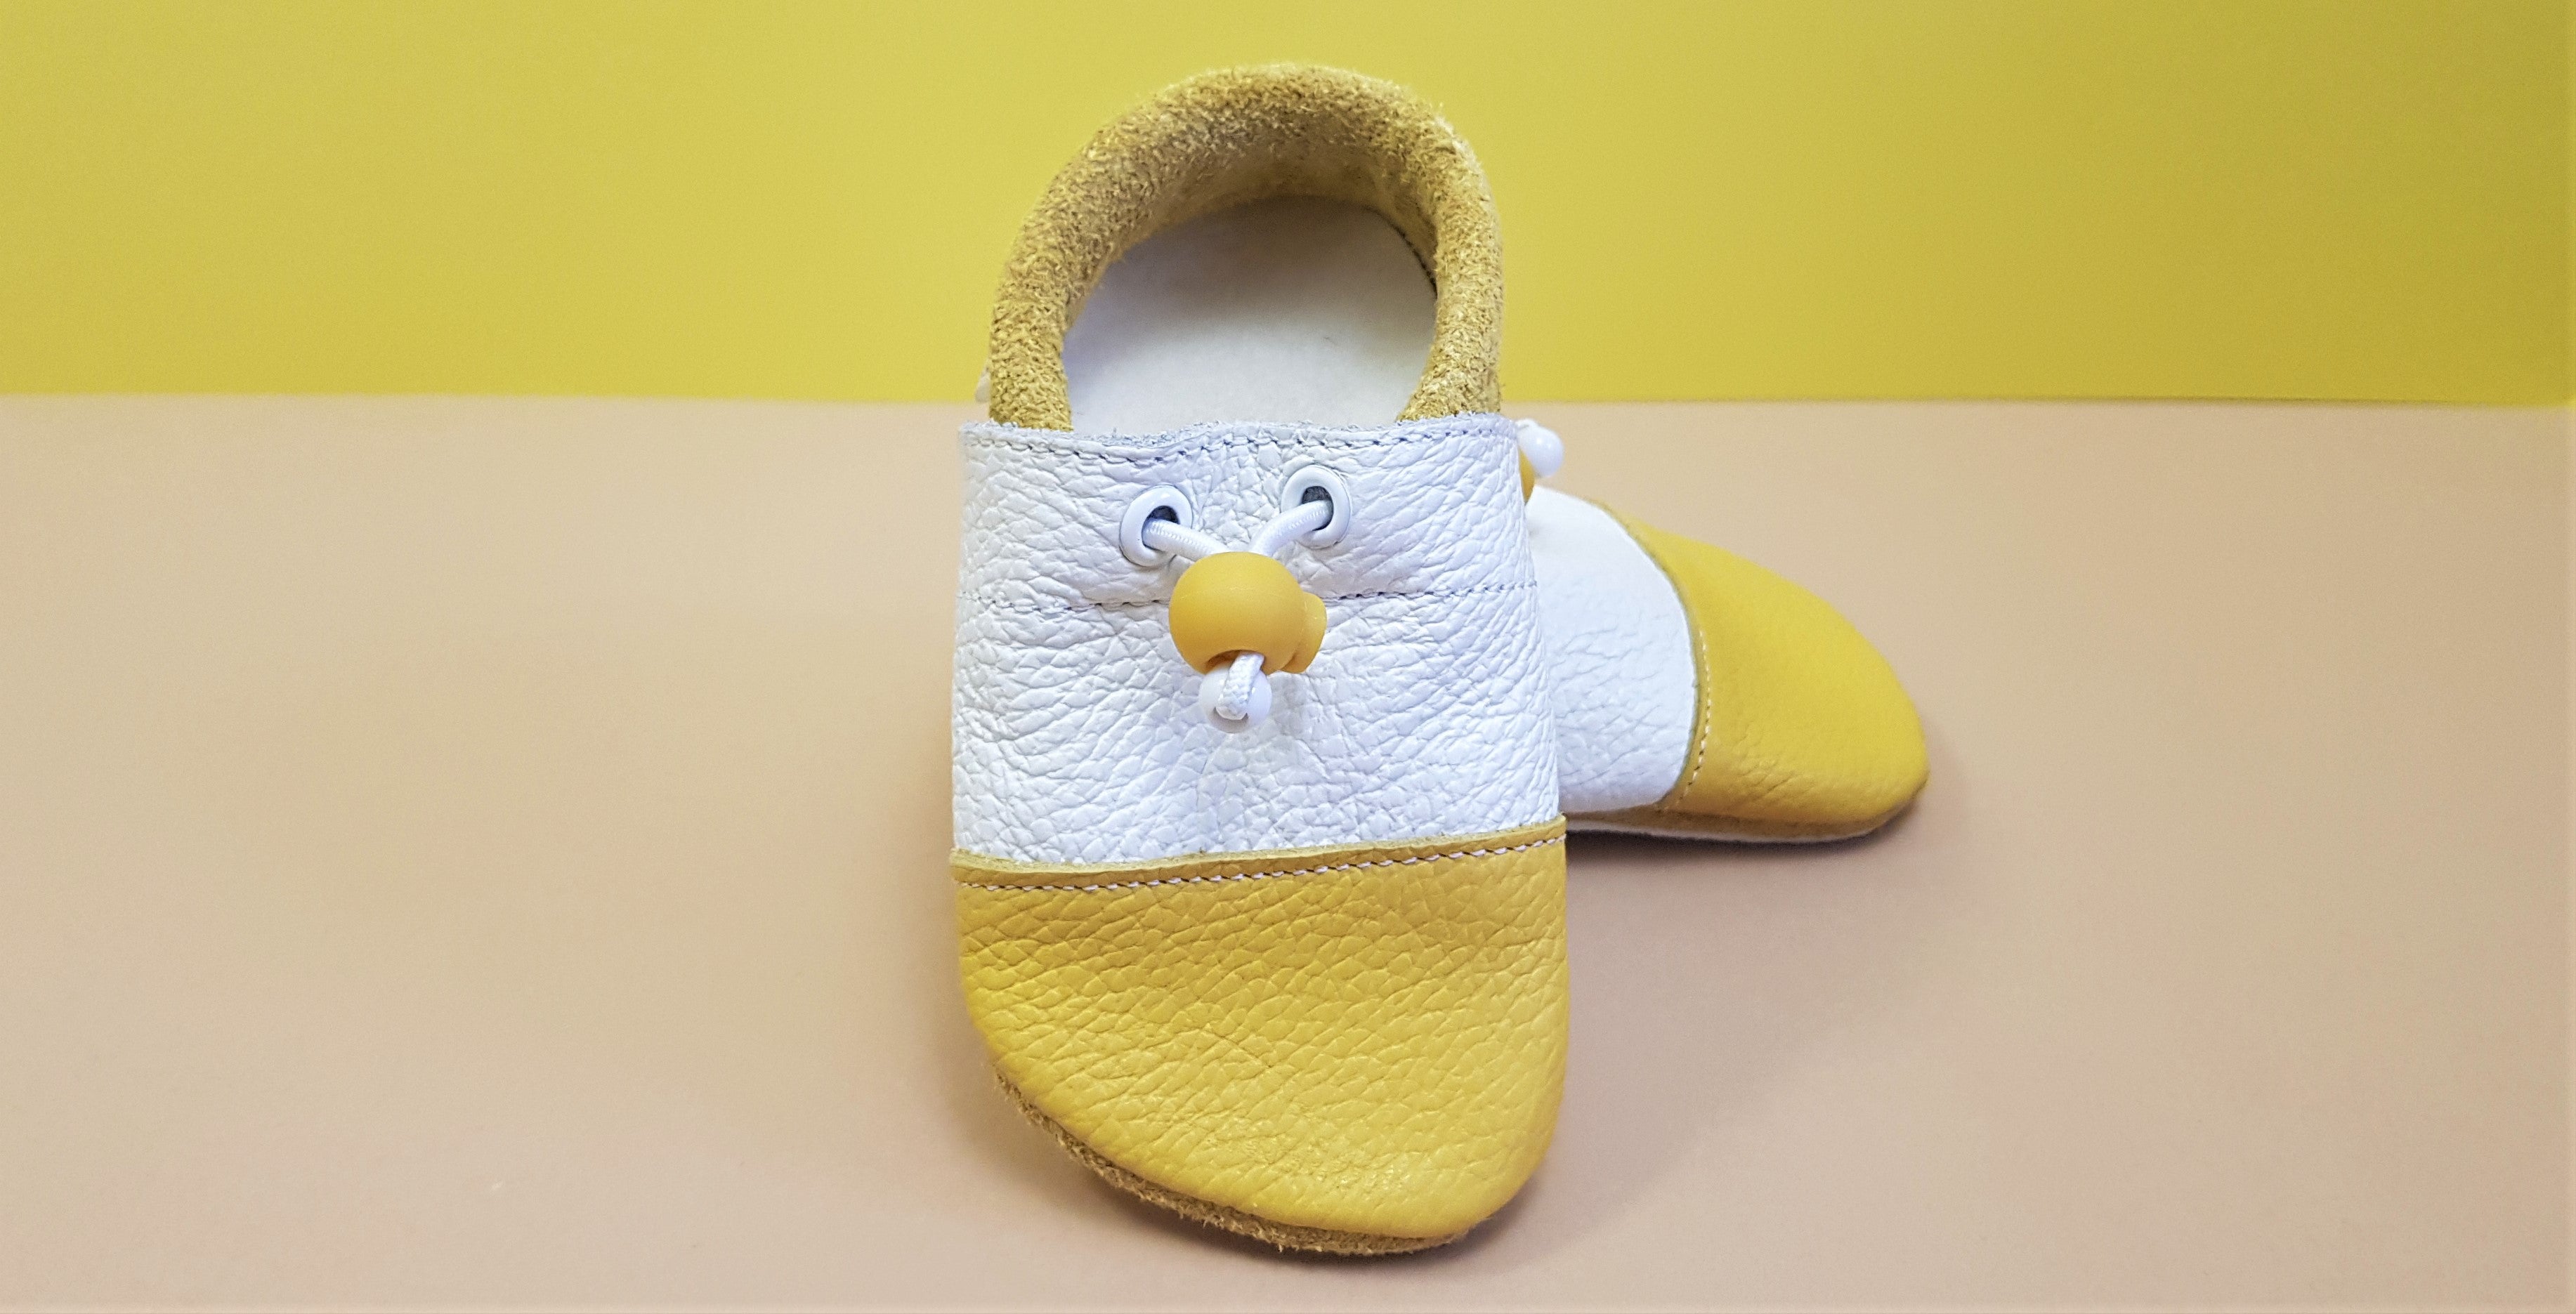 Yellow and white Nohatka soft sole booties/slippers for babies and toddler, anatomically shaped from soft leather with adjustable ankle fastening and anti slip indoor/outdoor sole